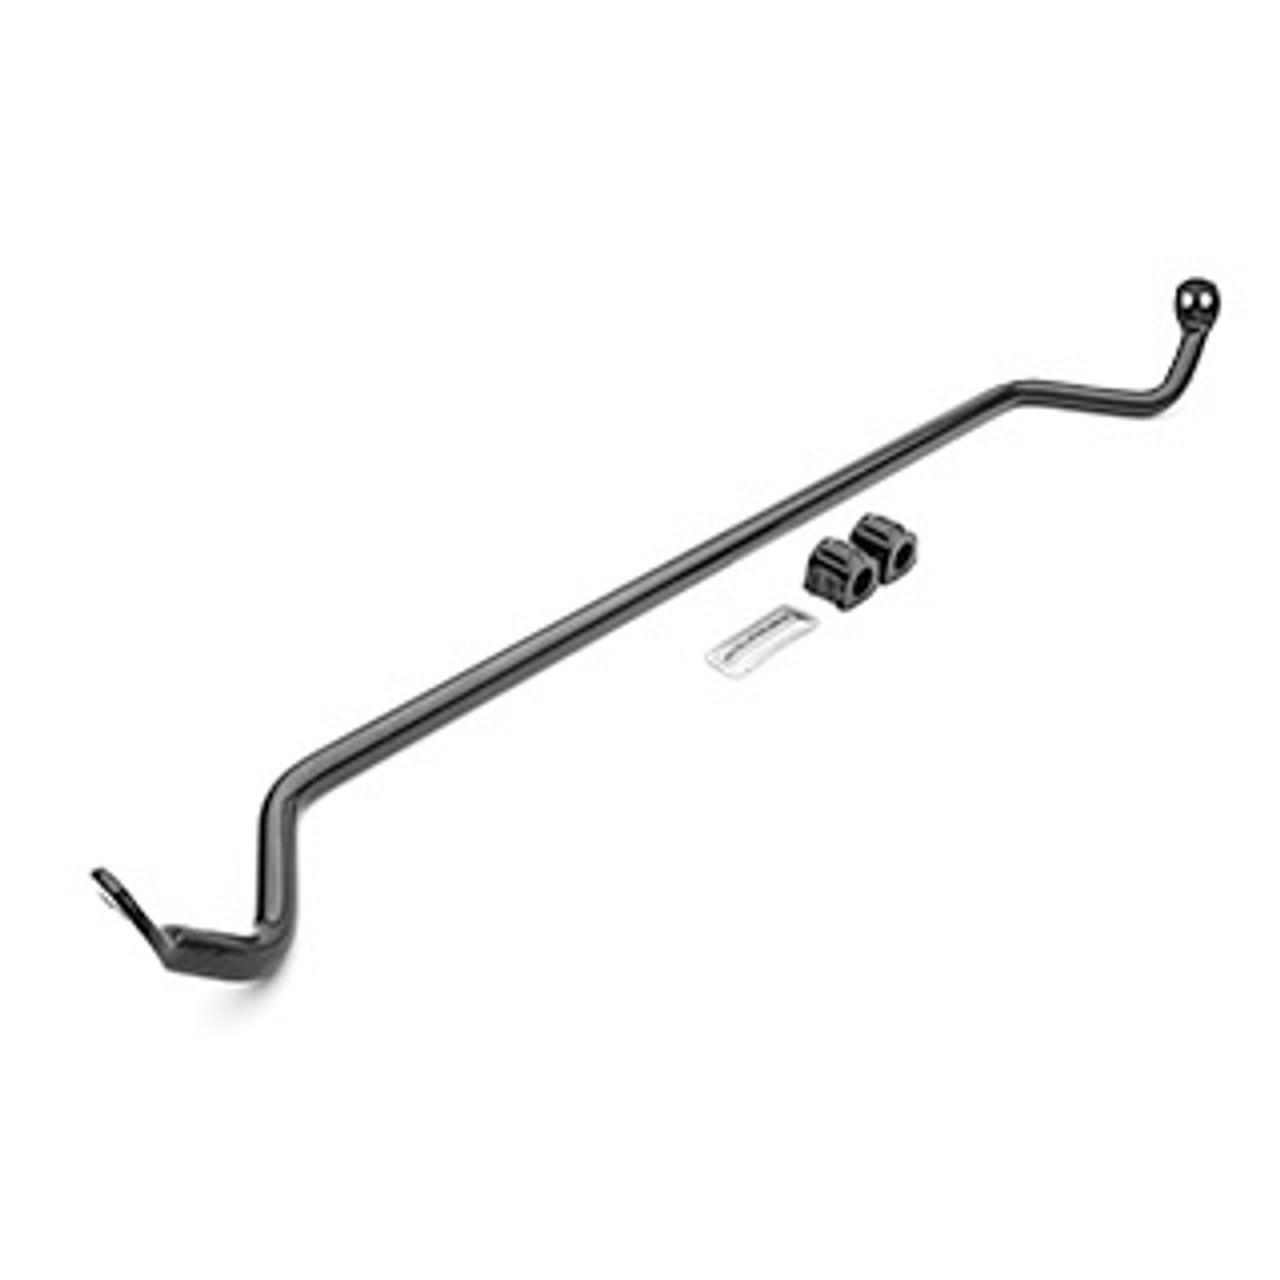 SUBARU DAILY DRIVER SUSPENSION PACKAGE - FRONT SWAY BAR 26MM - 2 POSITION ADJUSTABLE